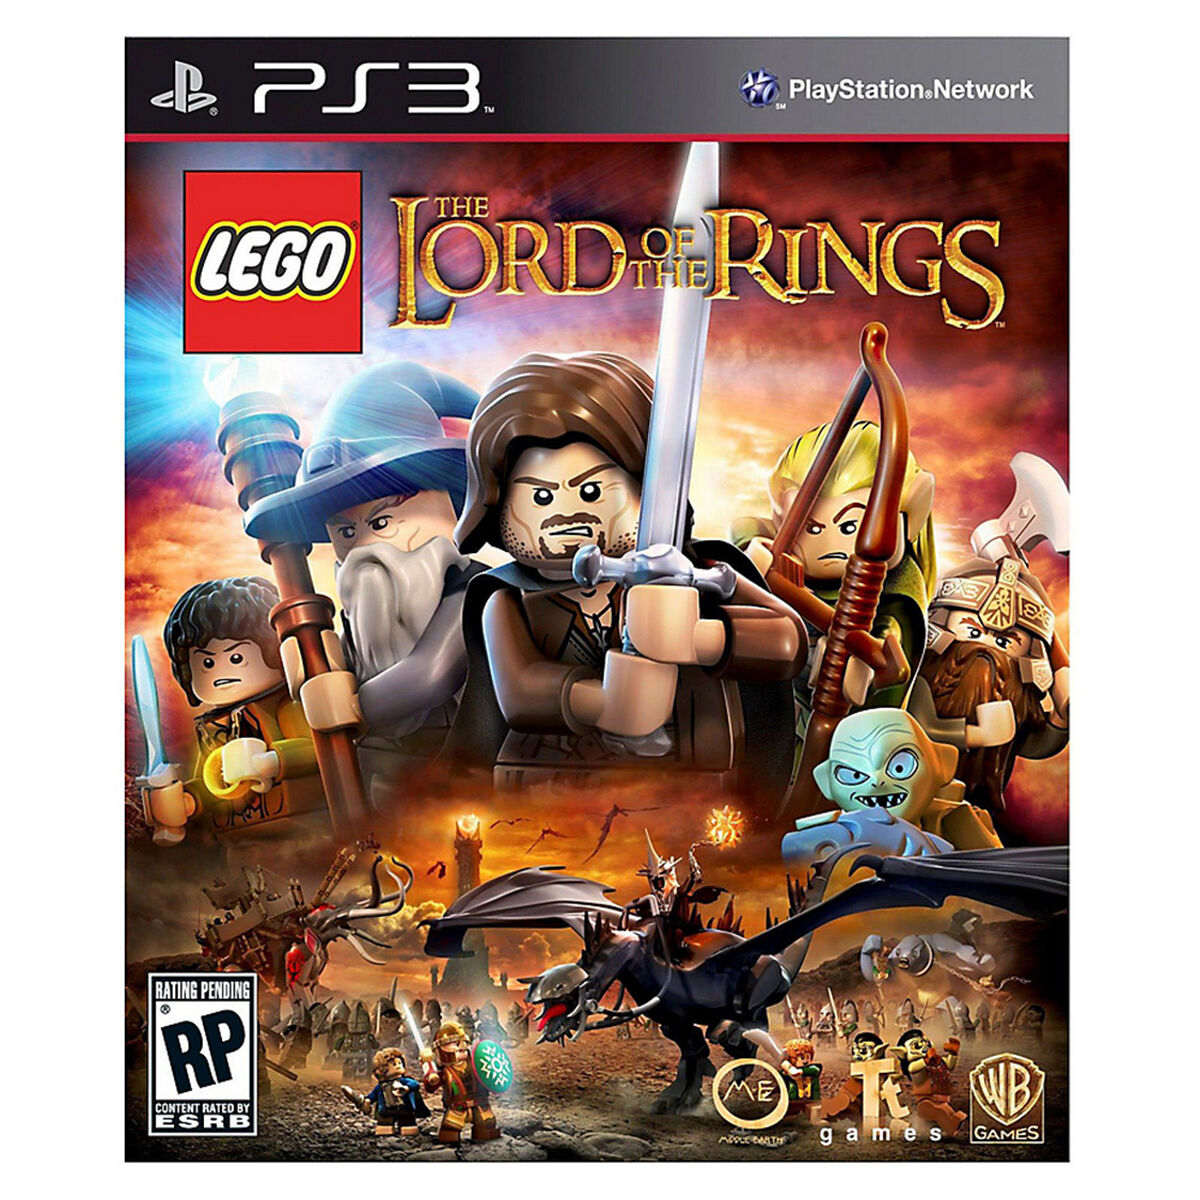 Juego PS3 LEGO Lord of the Rings + Pelicula Bluray